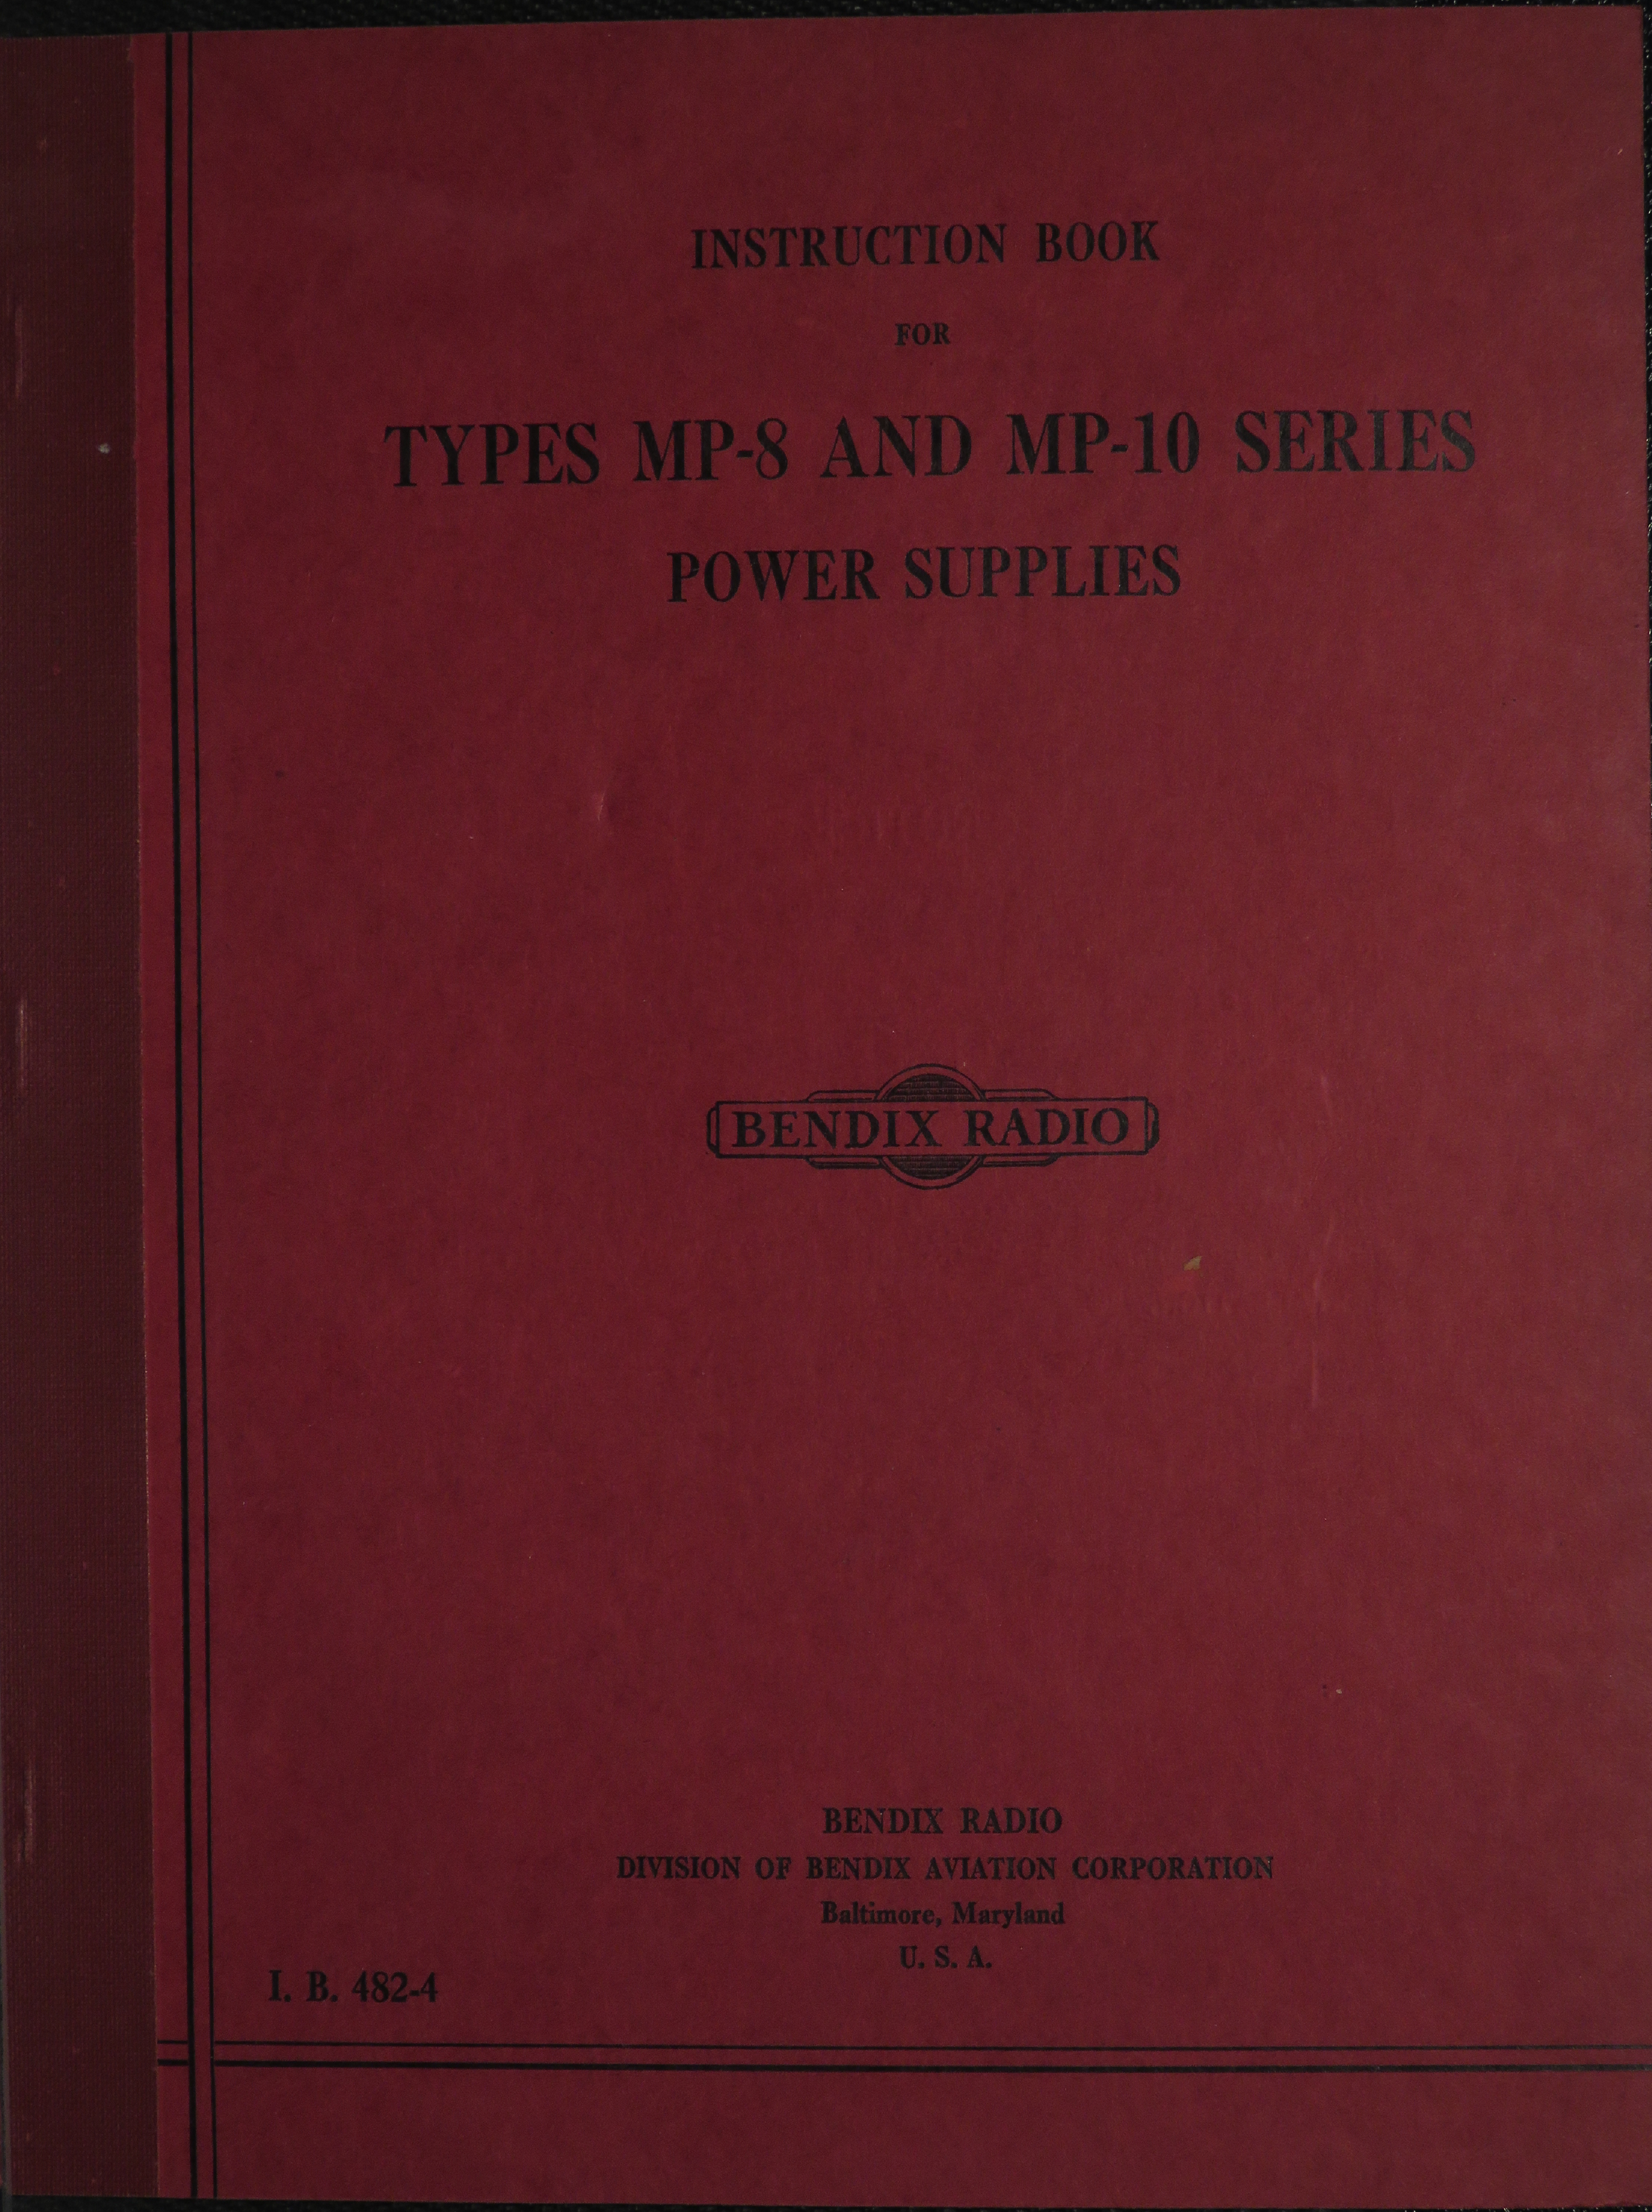 Sample page 1 from AirCorps Library document: Instruction Book for Types MP-8 and MP-10 Series Power Supplies